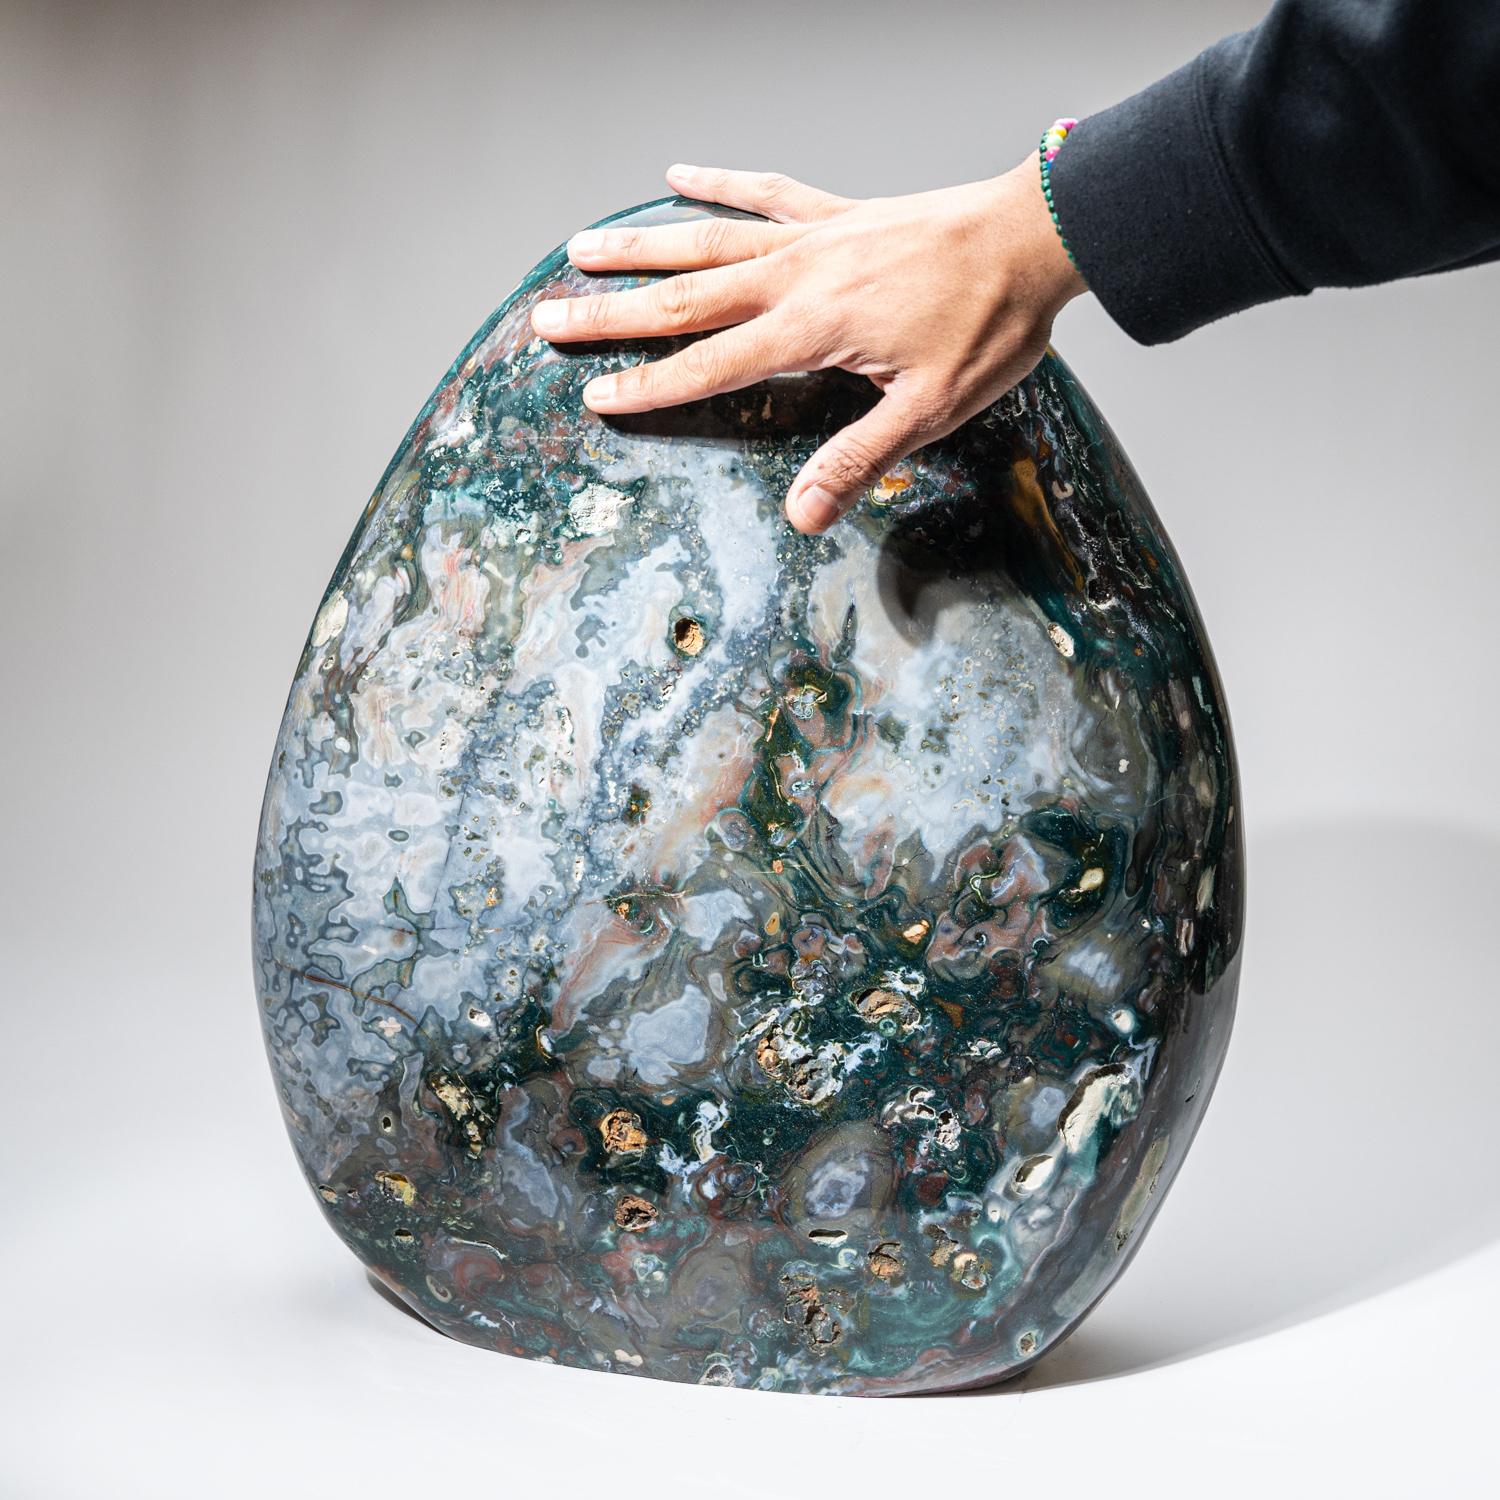 Museum quality, huge hand-polished freeform specimen, made from a solid piece of natural Madagascan Ocean Jasper. This large piece has an amazing pattern with beautiful hues of green, red, yellow, and tan. This unique specimen is the perfect